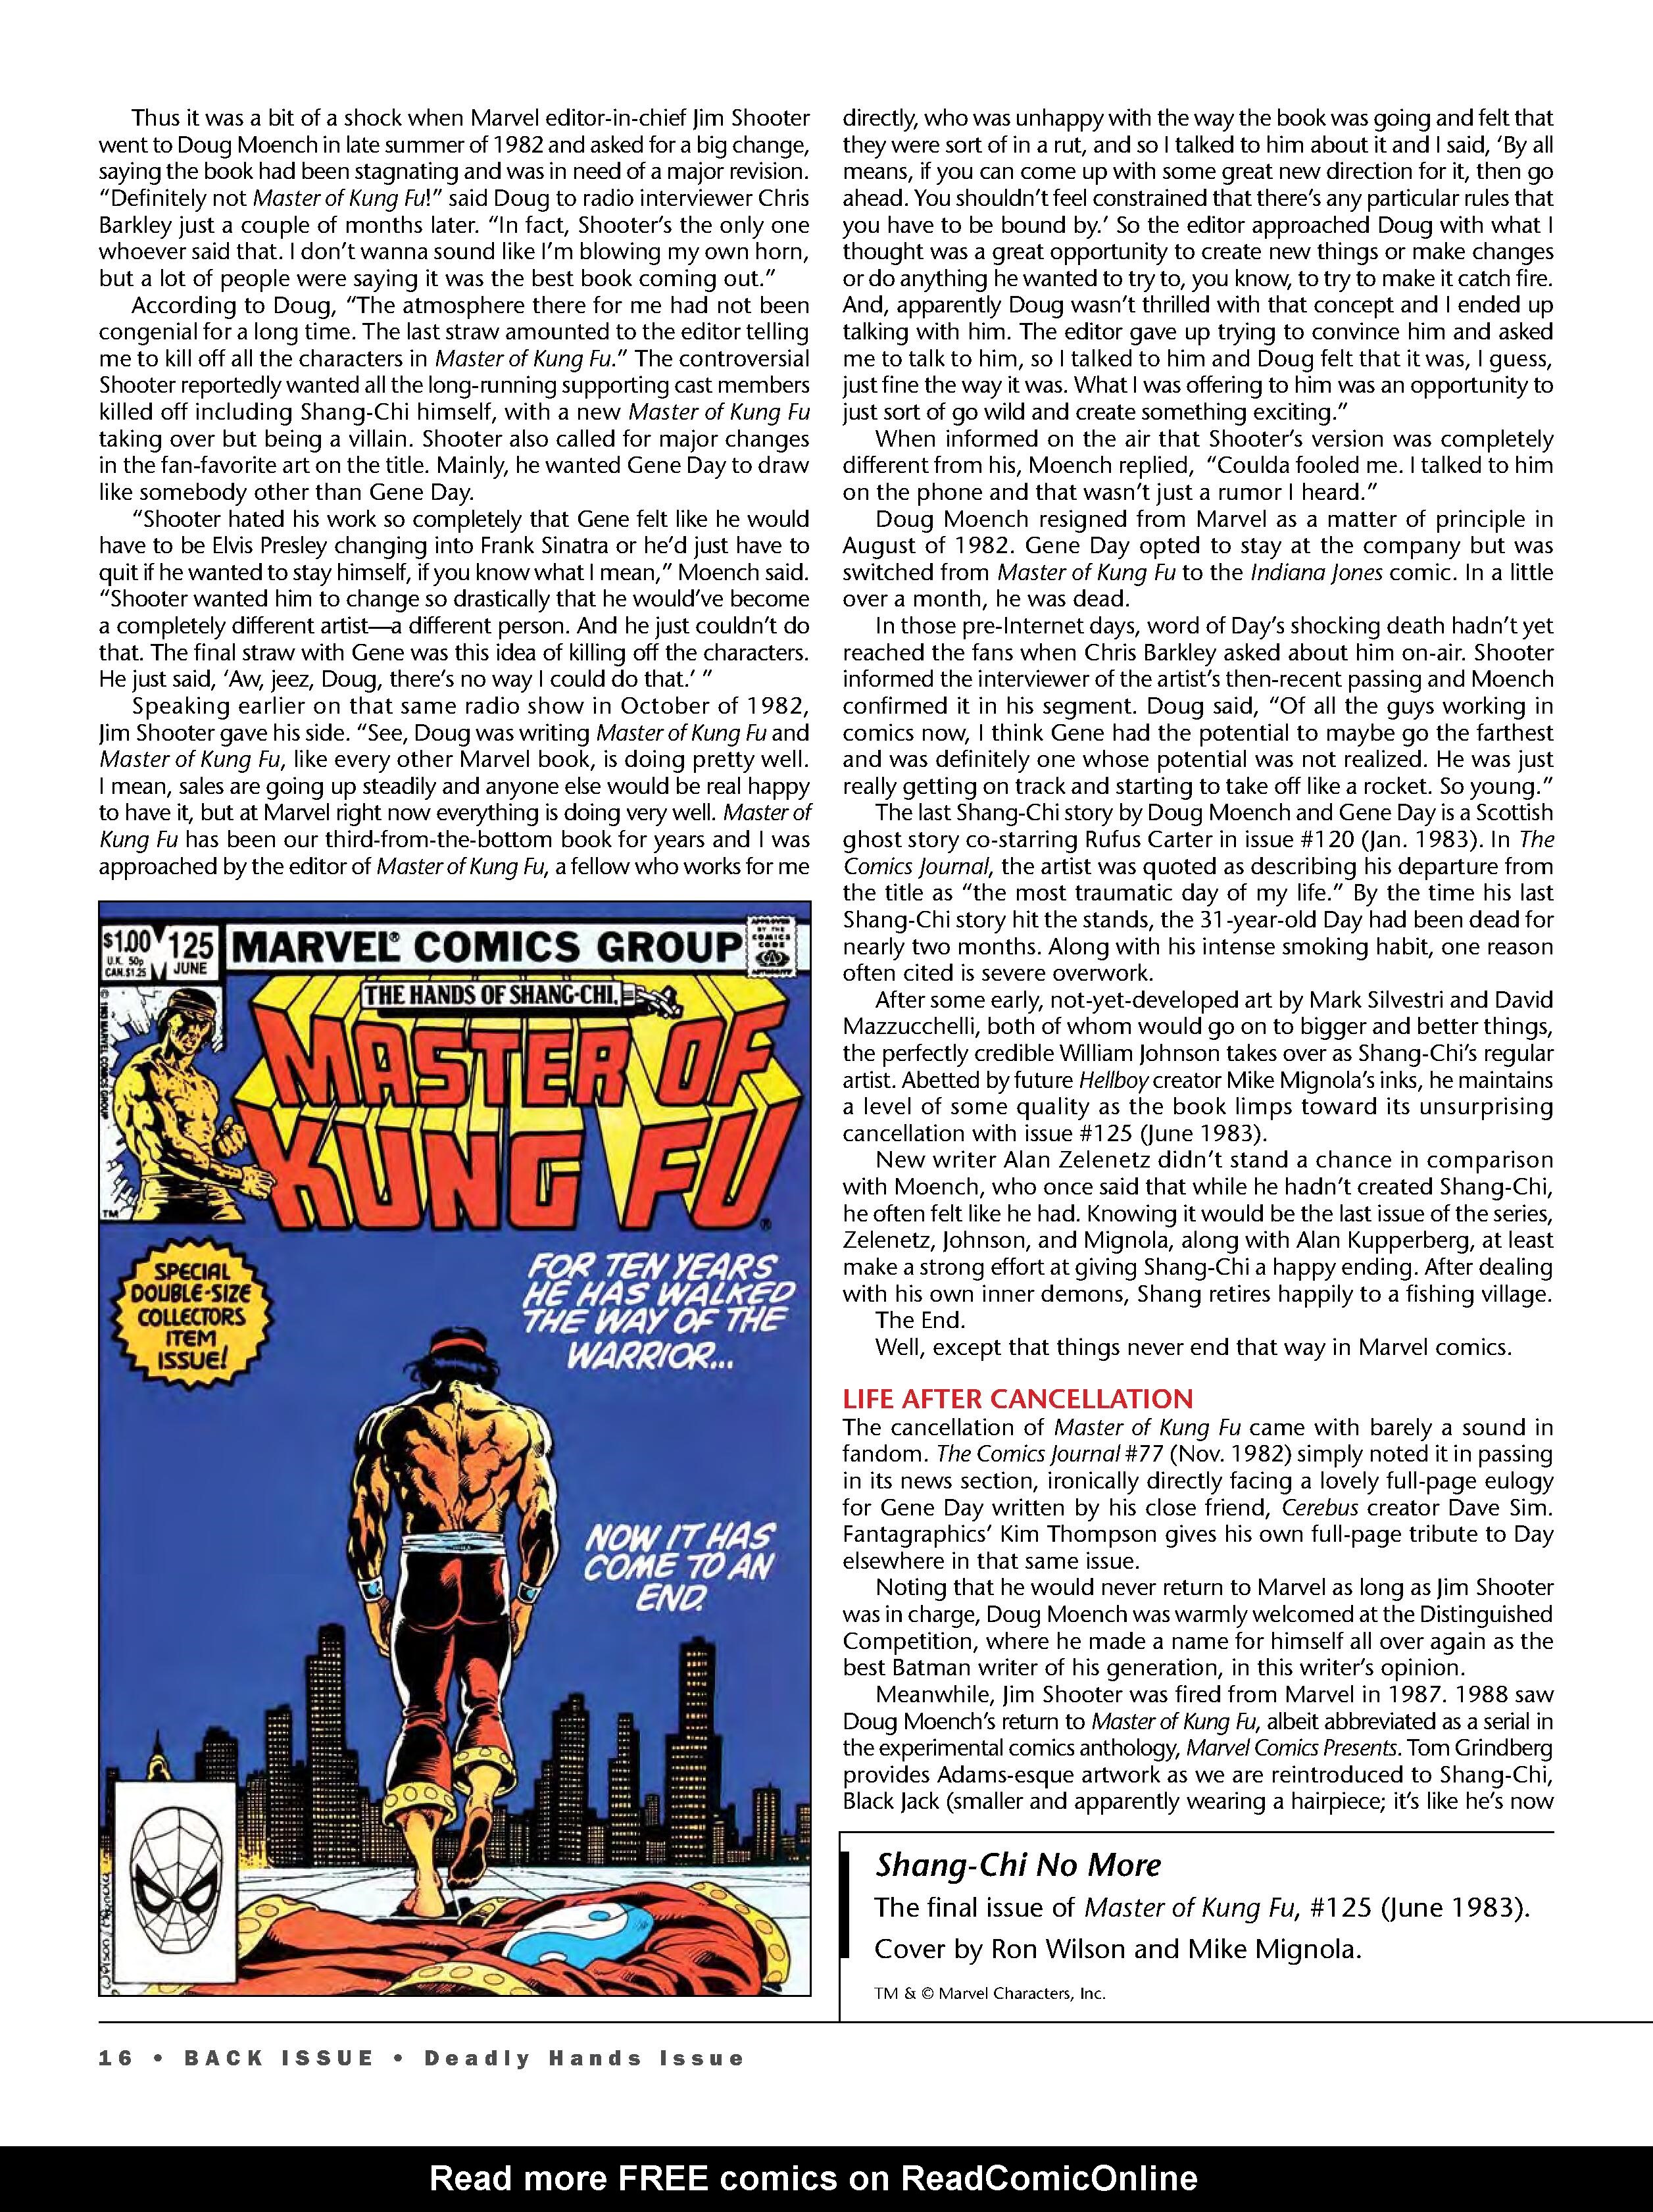 Read online Back Issue comic -  Issue #105 - 18